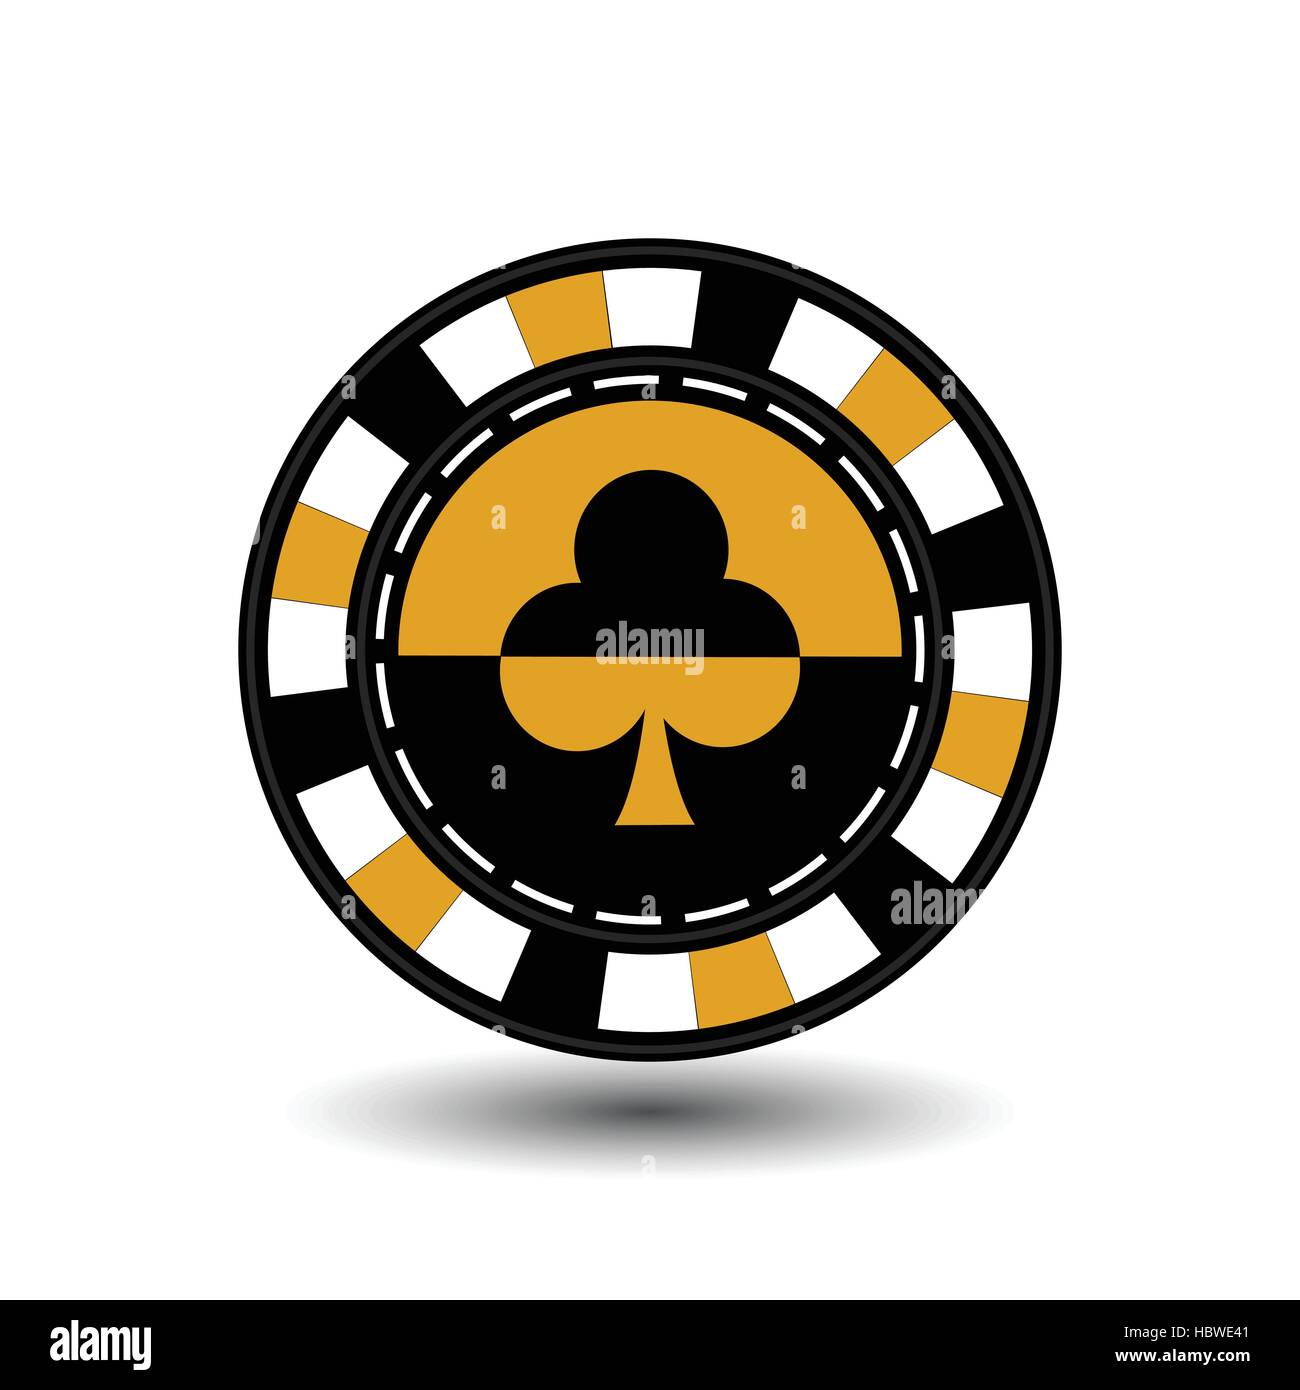 chips for poker yelloy a suit club a yellow black and white dotted line the line. an icon on the white isolated background. illustration eps 10 vector Stock Vector